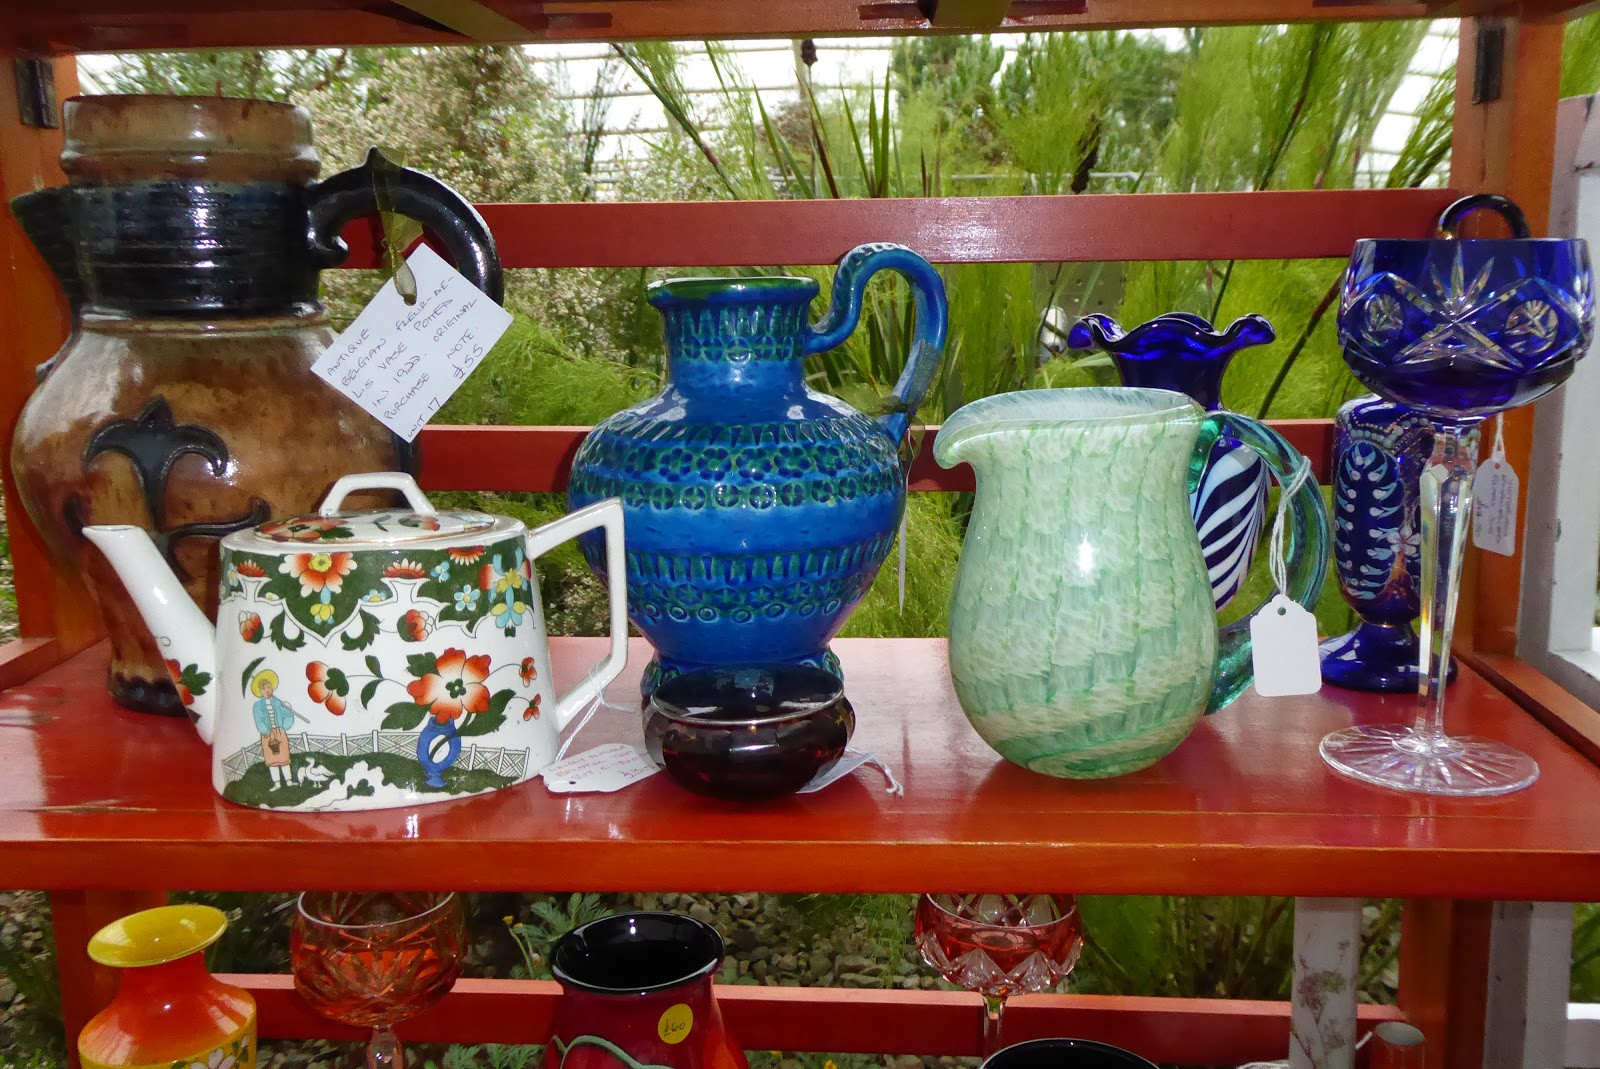 12 Popular Old Vases for Sale 2024 free download old vases for sale of codlinsandcream2 phew that was a tiring weekend with a big hefty fleur de lis jug from belgium includes sale docket dated 1922 bittori jug really heavy green glass jug 